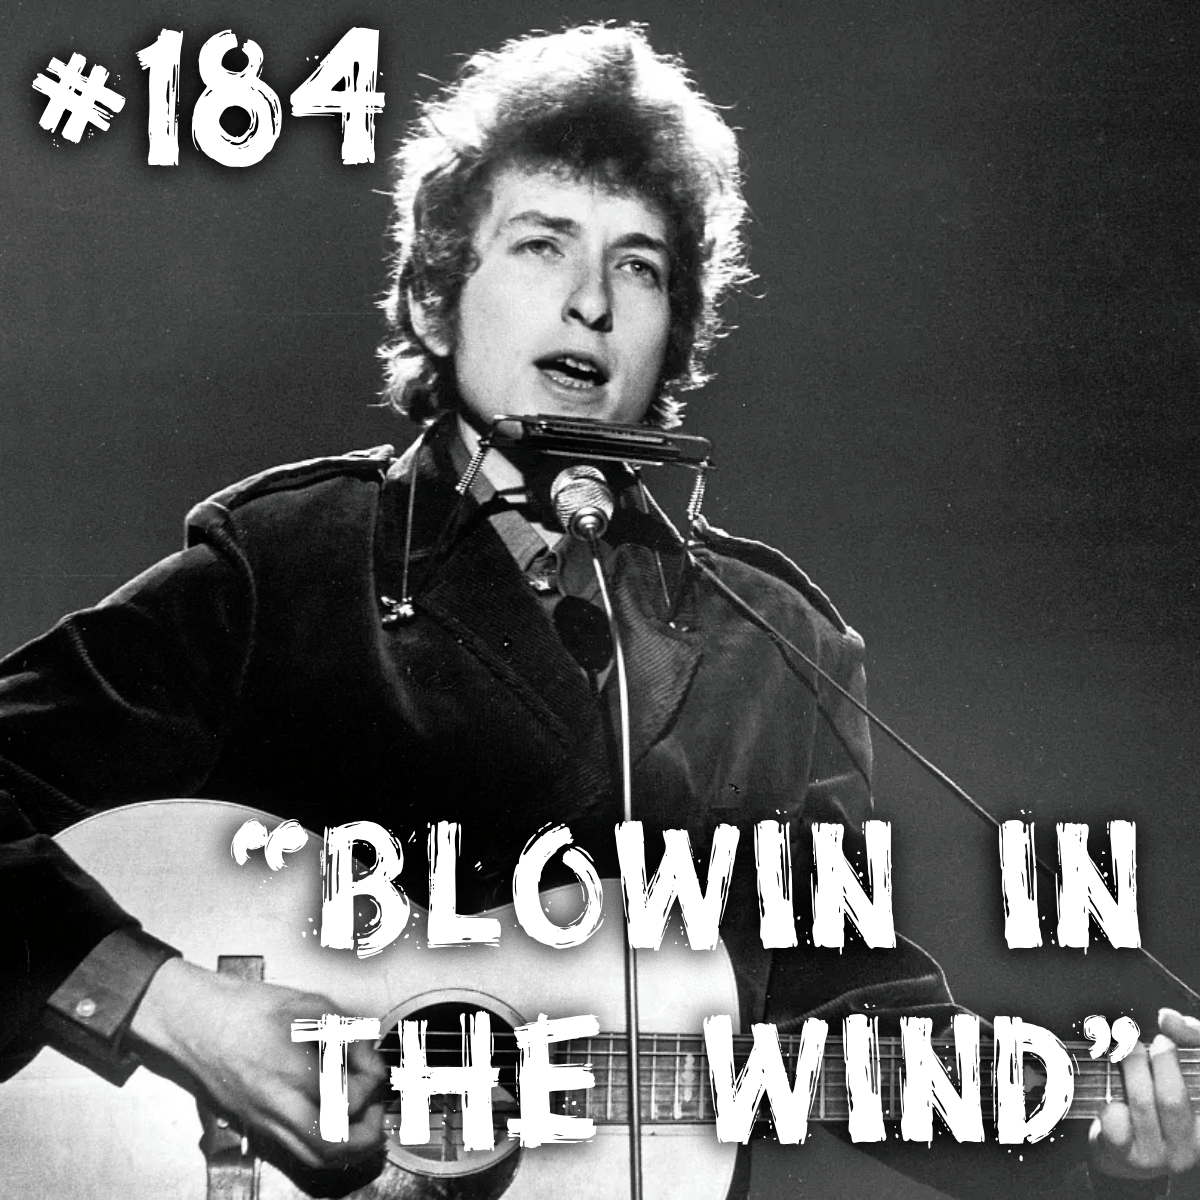 Farelos Musicais #184 – Blowin’in the Wind (Bob Dylan)